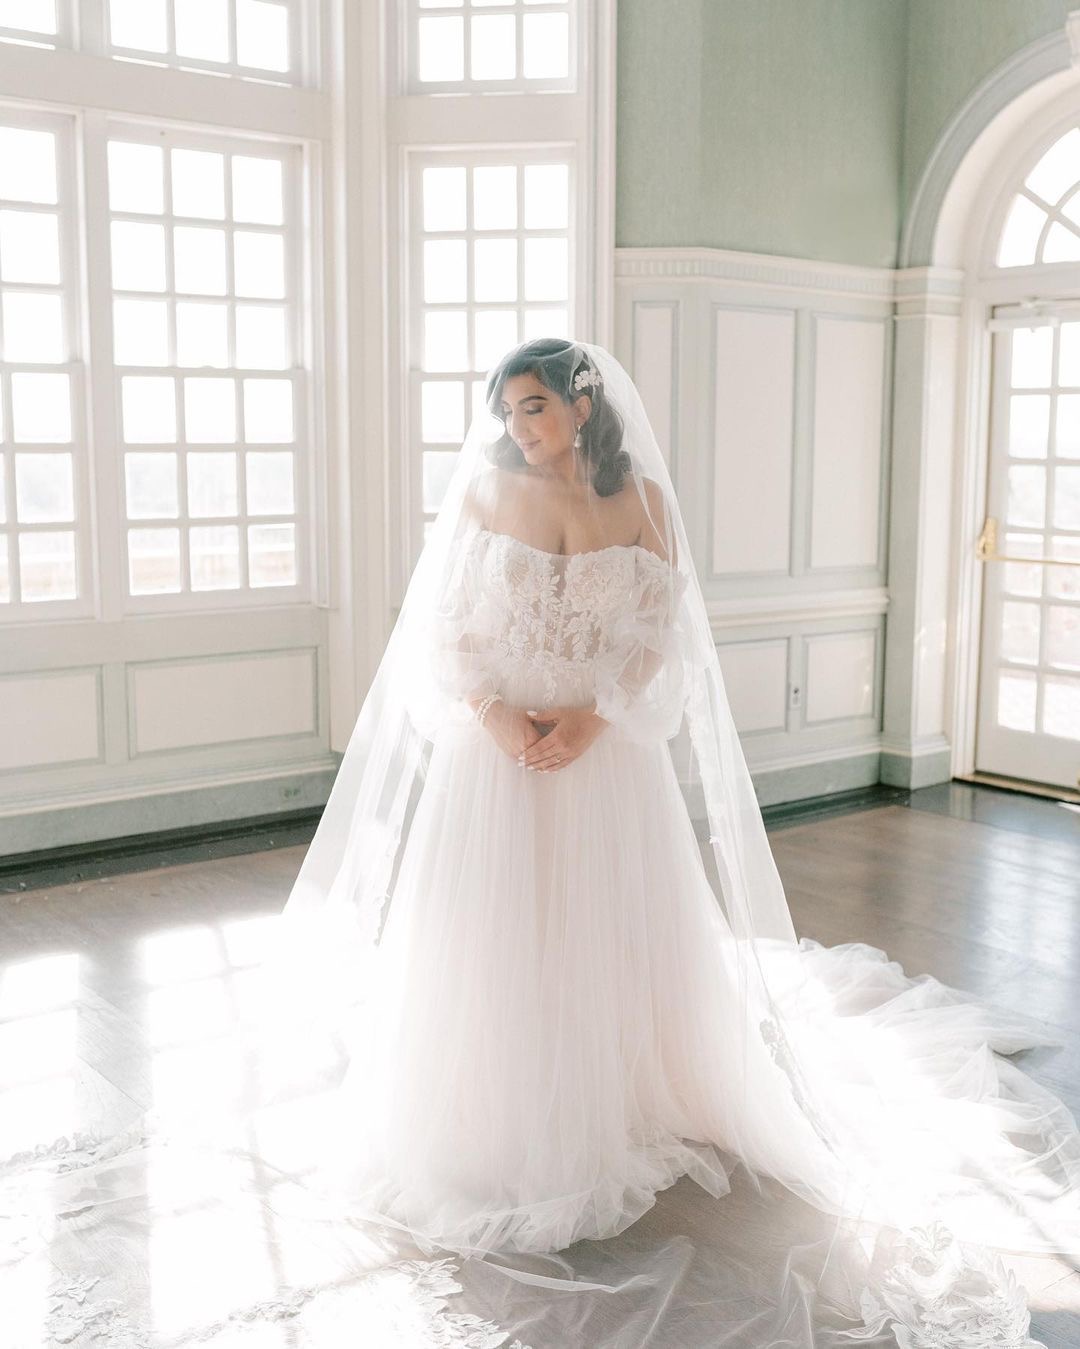 Bride standing in a sunlit room wearing a long ethereal wedding gown from Tiffanys Bridal in Richmond Virginia